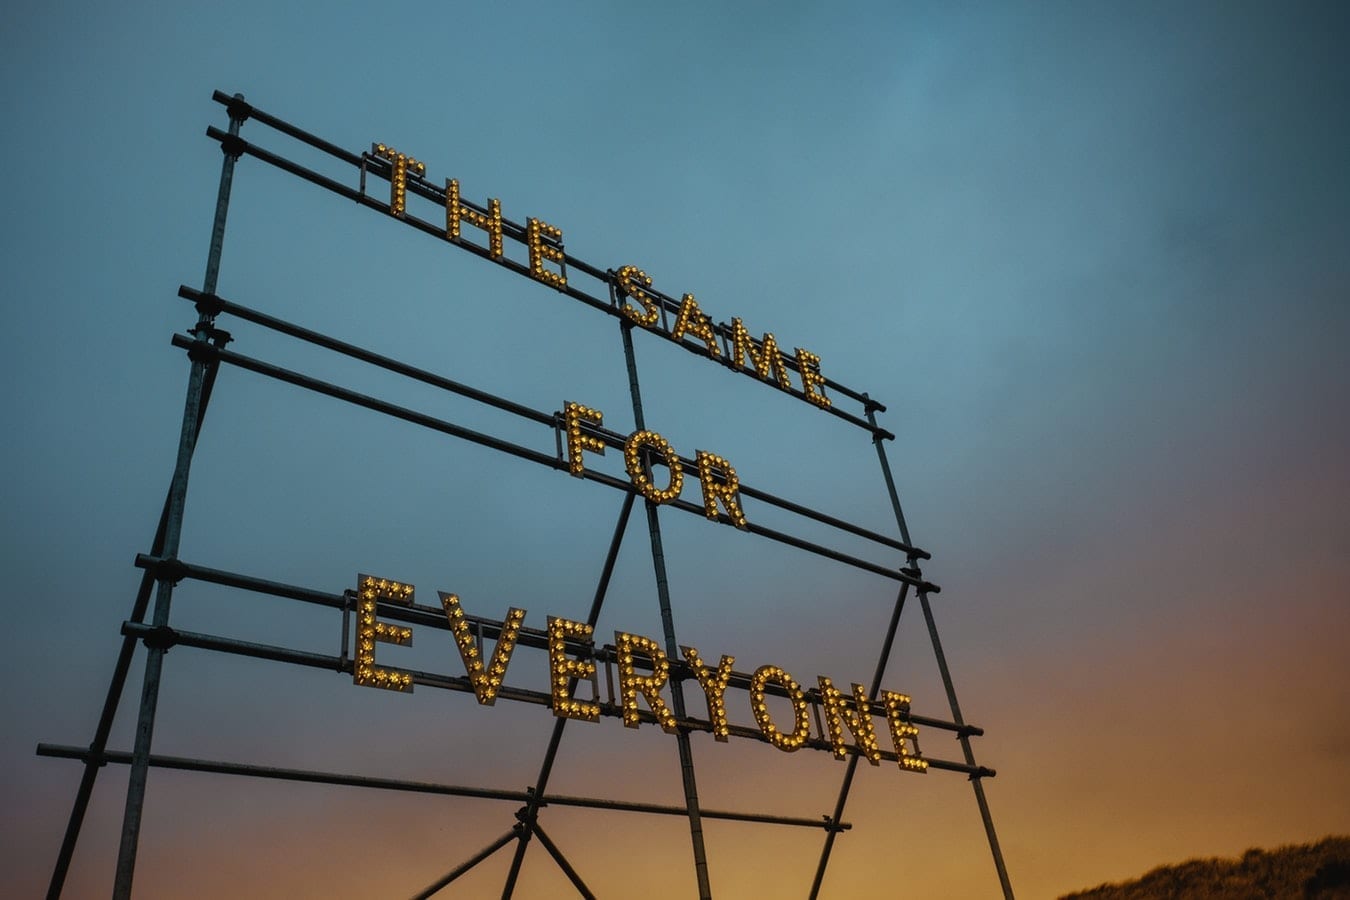 A large roadside sign with the words "The Same For Everyone" in lights